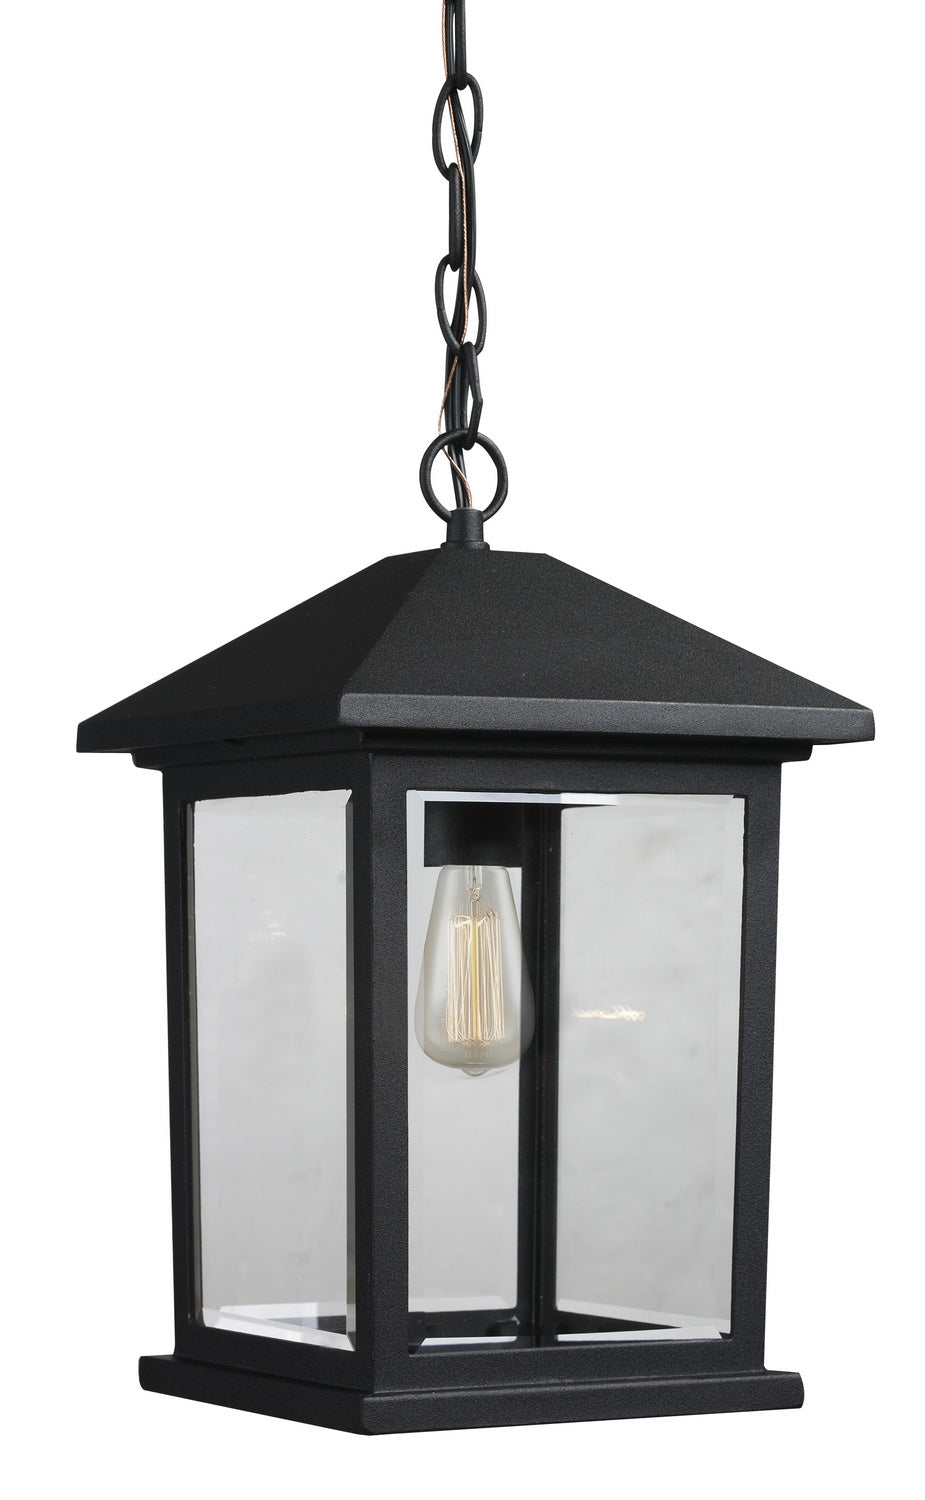 Portland 1 Light Outdoor Chain Light in Black with Clear Beveled Glass